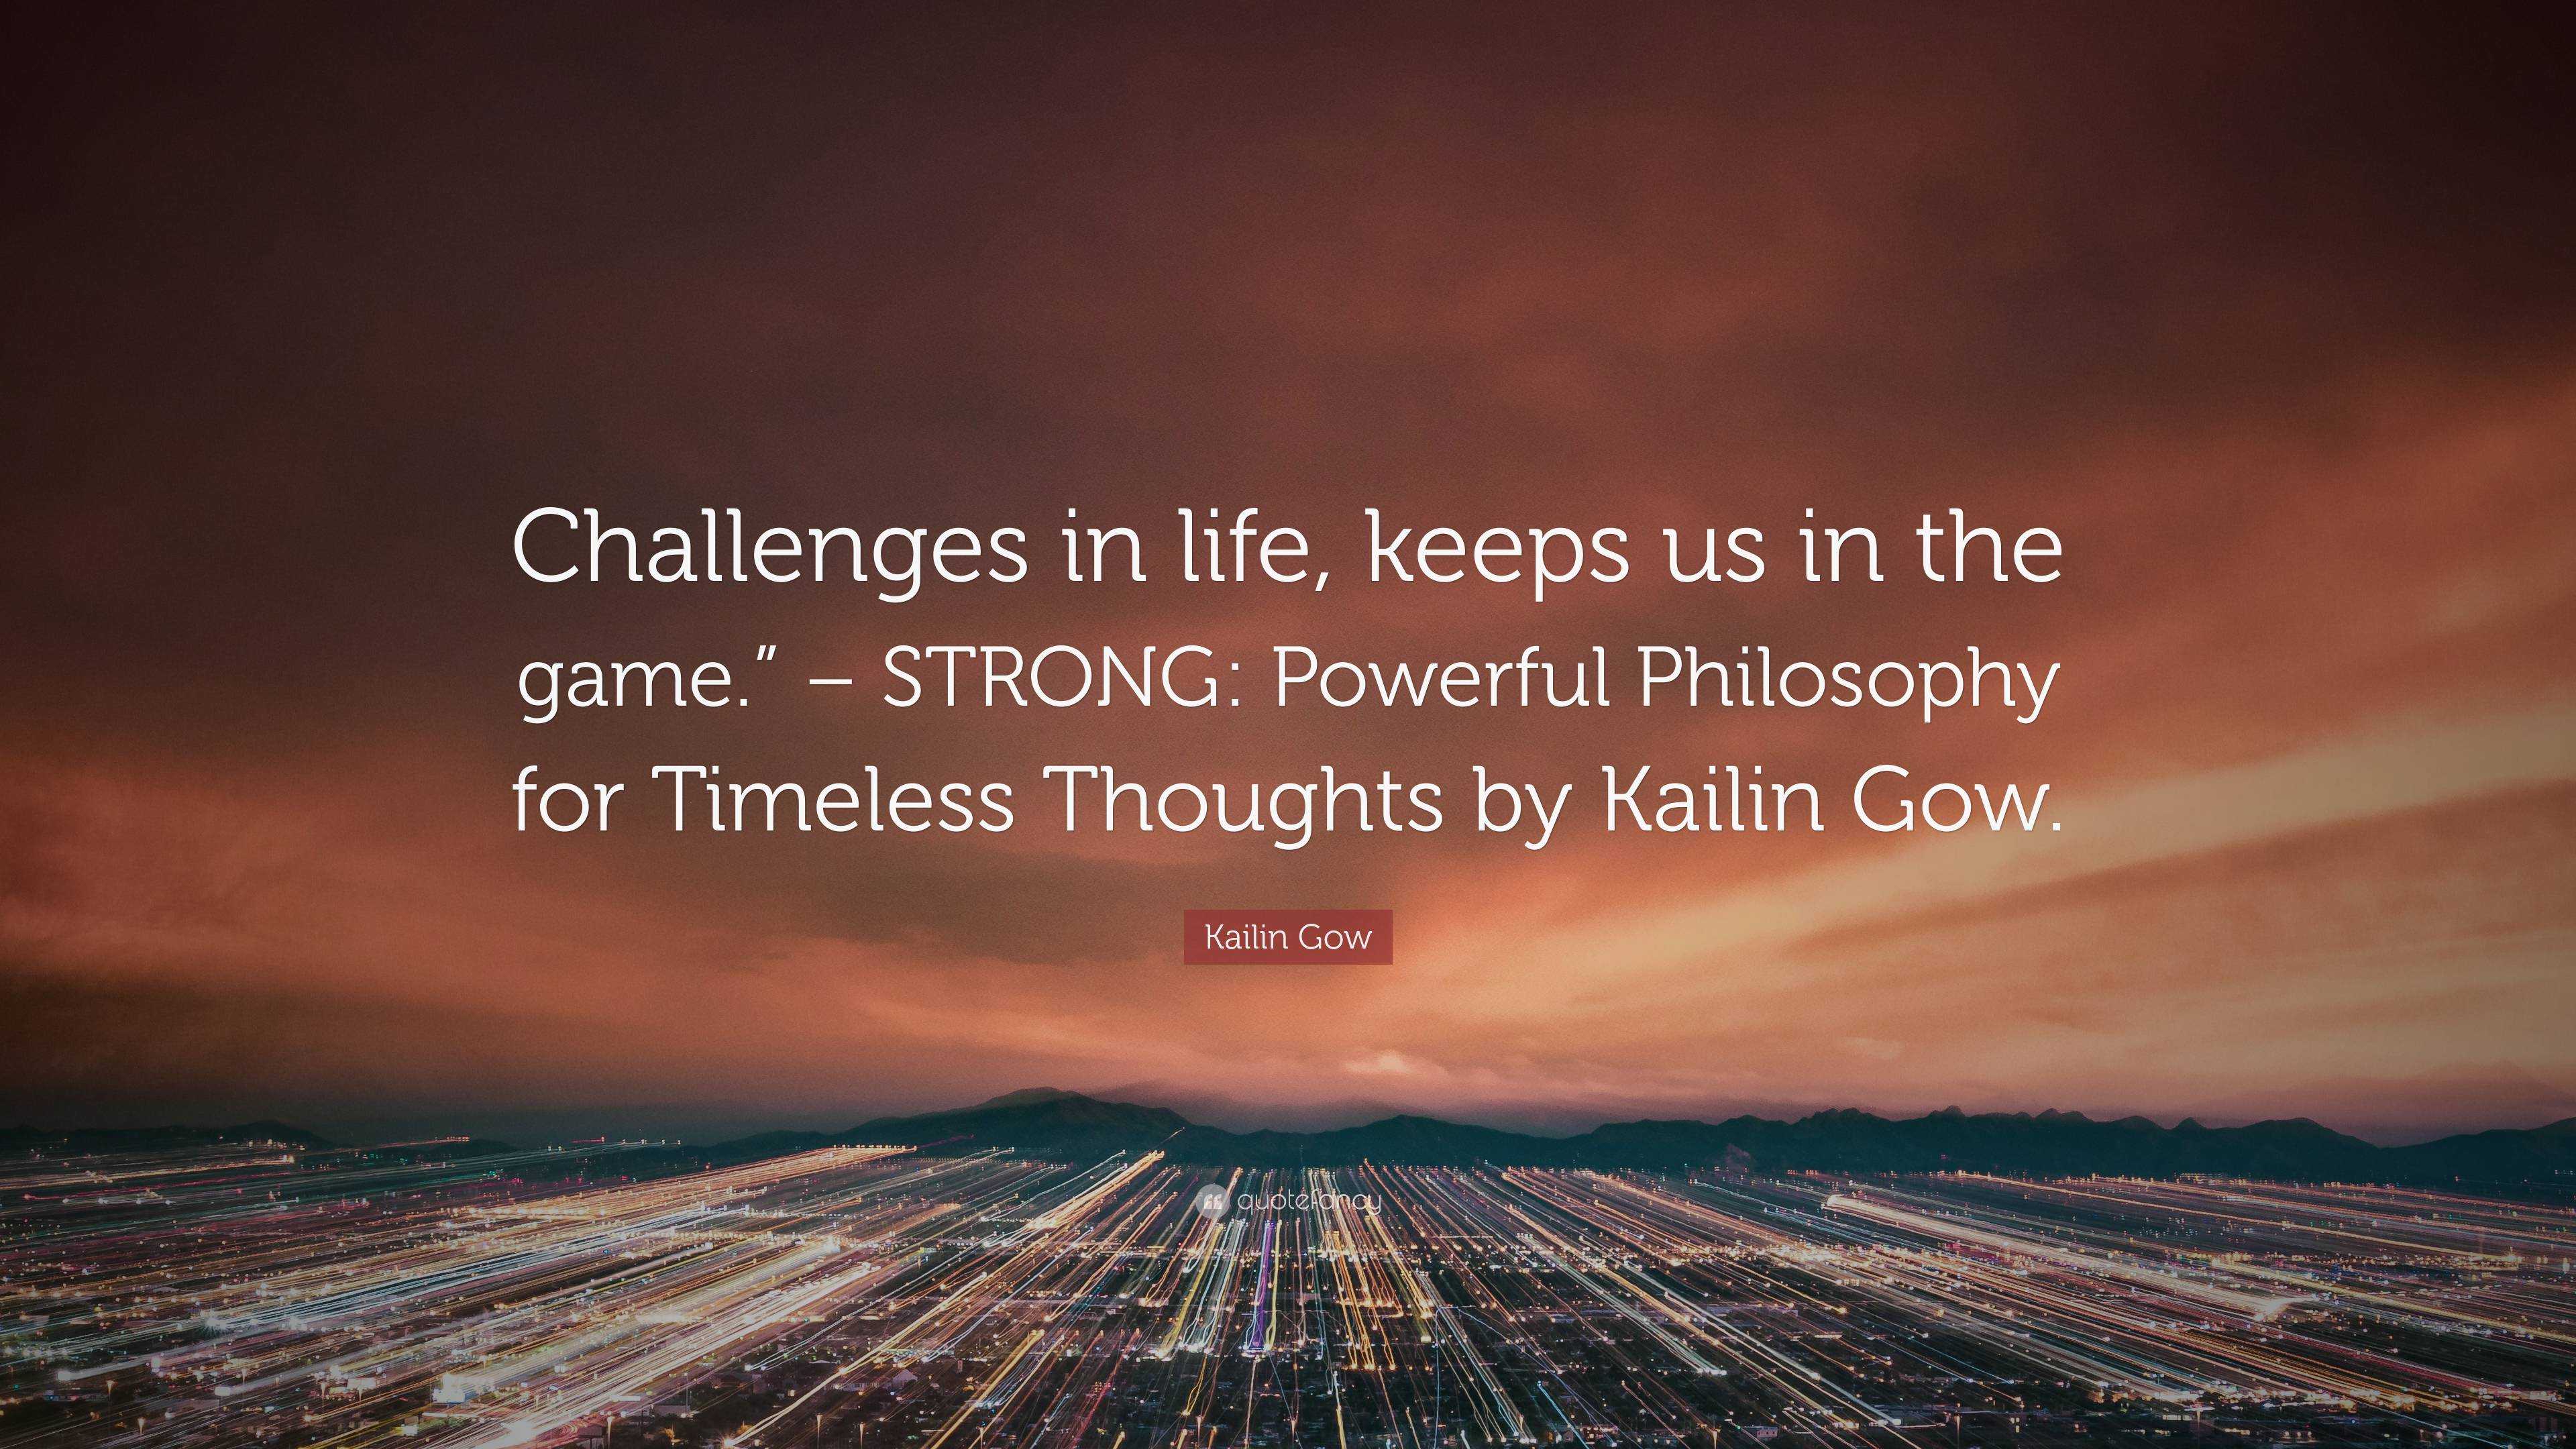 Kailin Gow Quote: “Challenges in life, keeps us in the game.” – STRONG:  Powerful Philosophy for Timeless